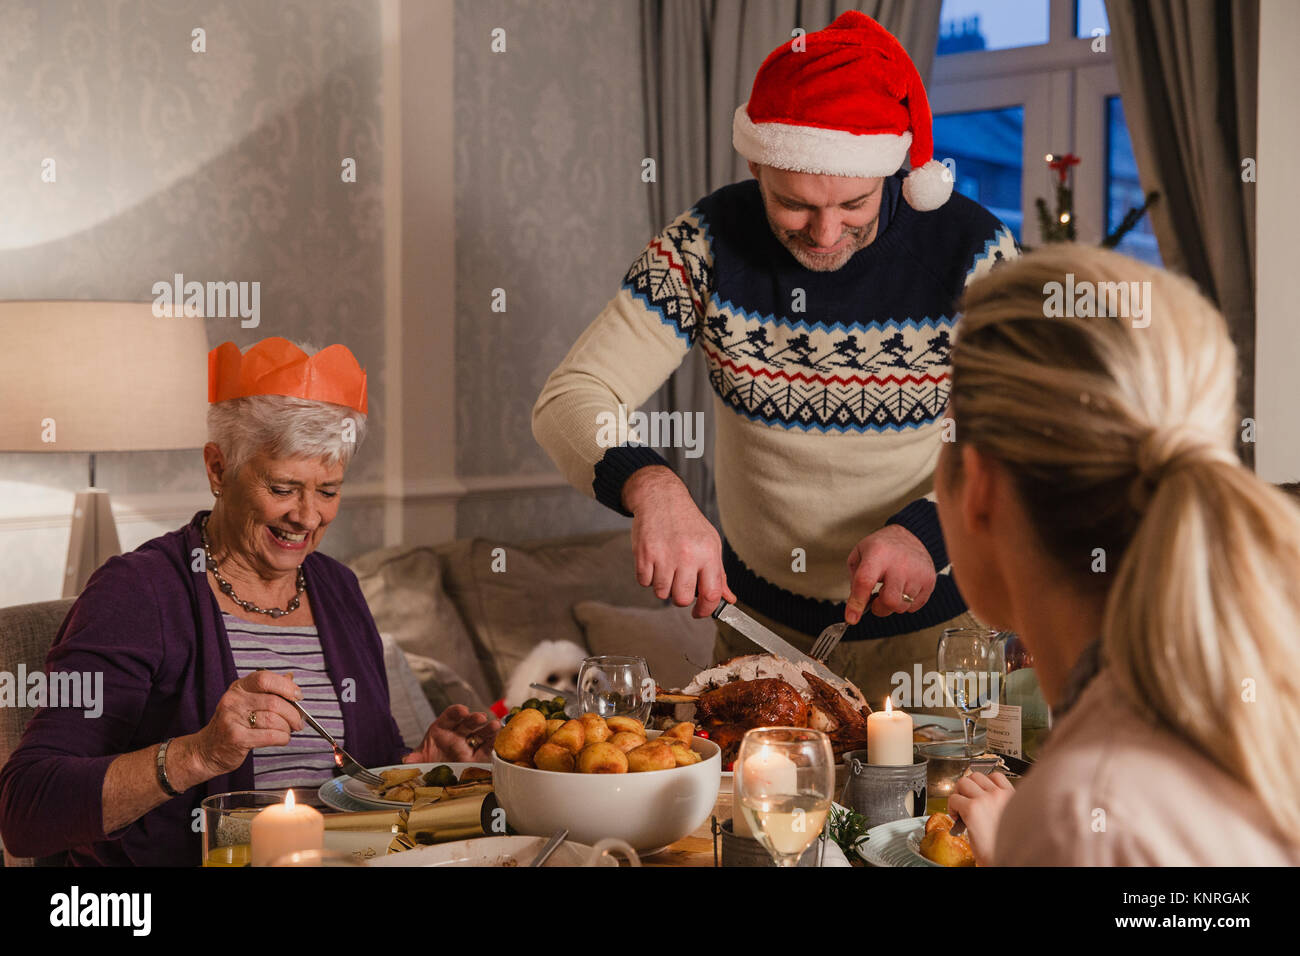 Point of view shot of a family christmas dinner. The man is carving the turkey. Stock Photo